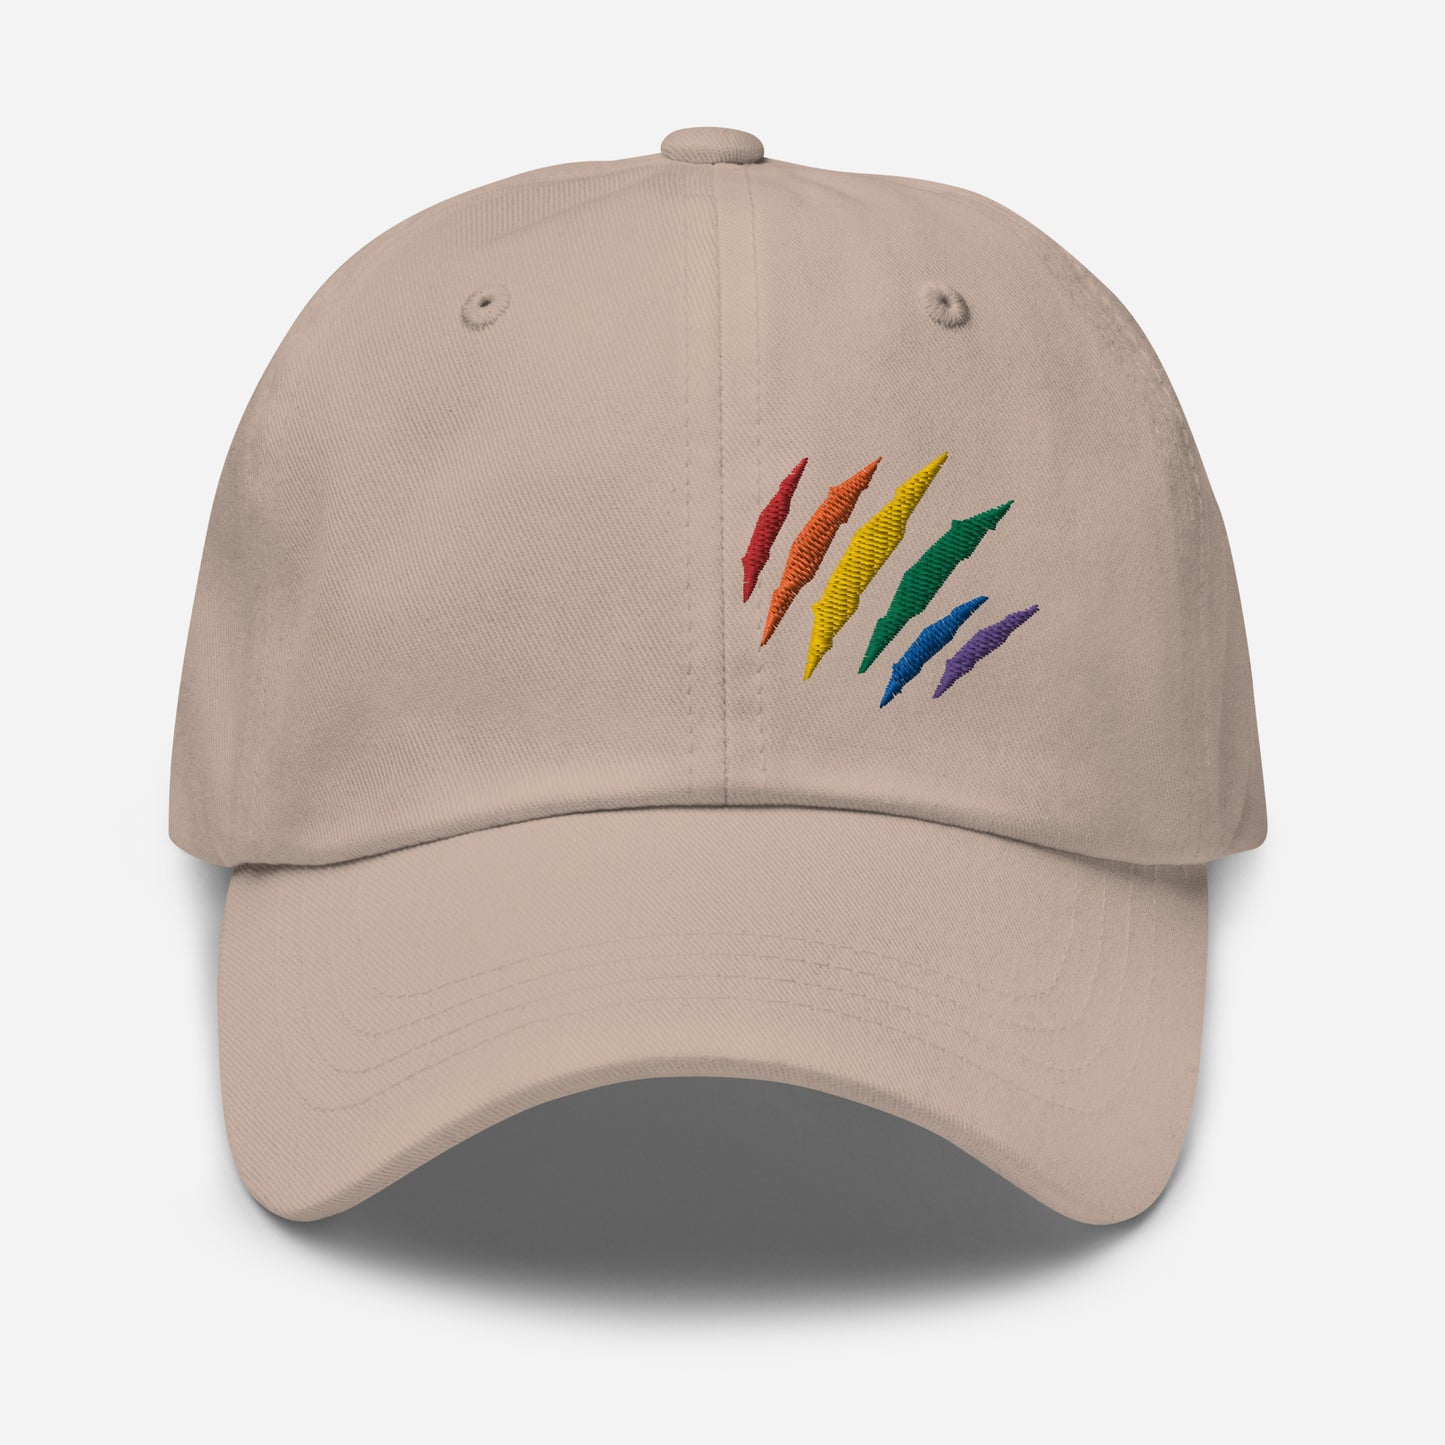 Stone baseball hat featuring rainbow pride scratch mark embroidery with a low profile, adjustable strap.